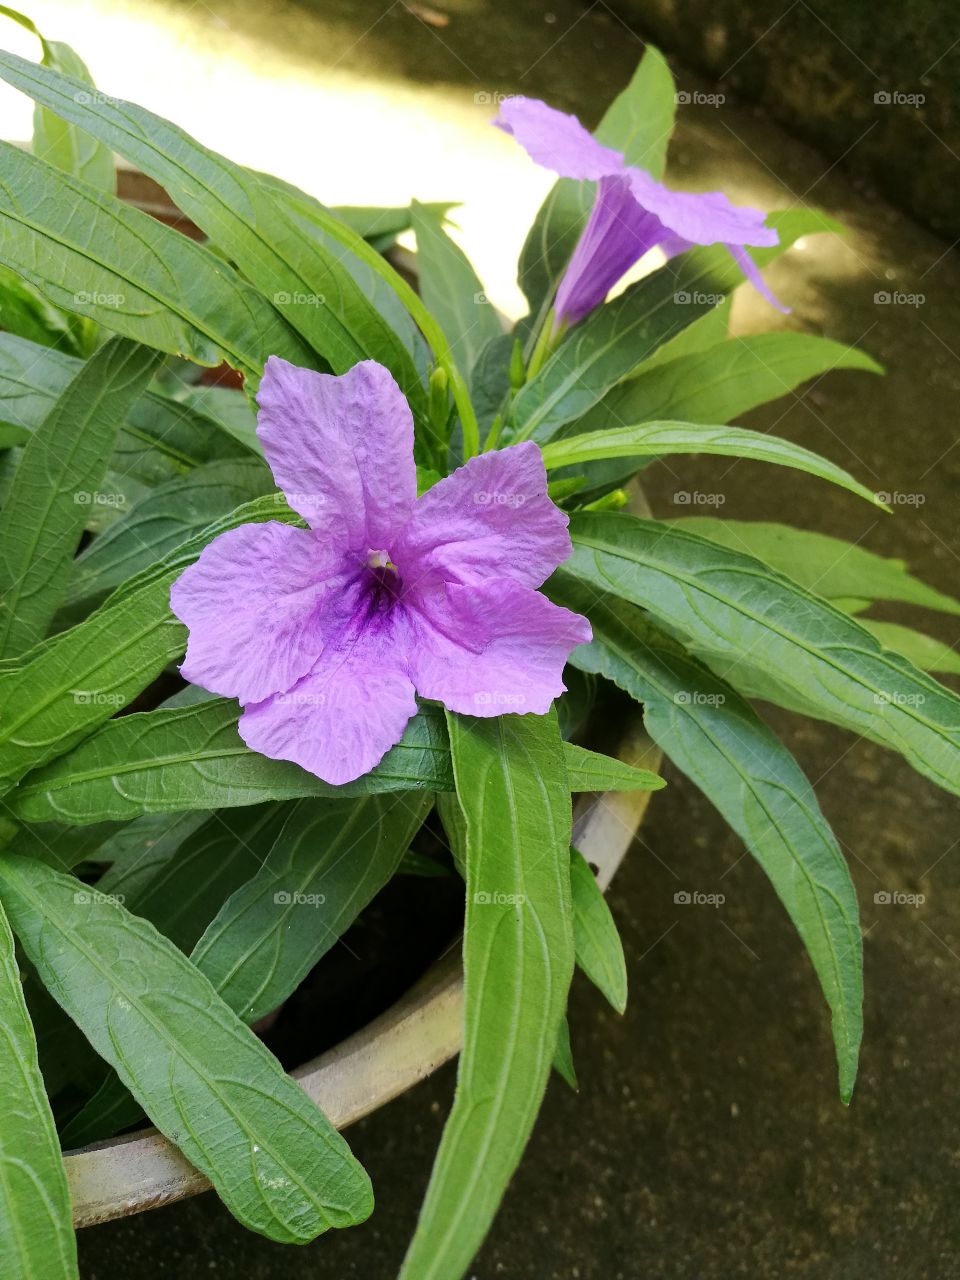 Closeup of purple wild petunia flowers with long green leaves.